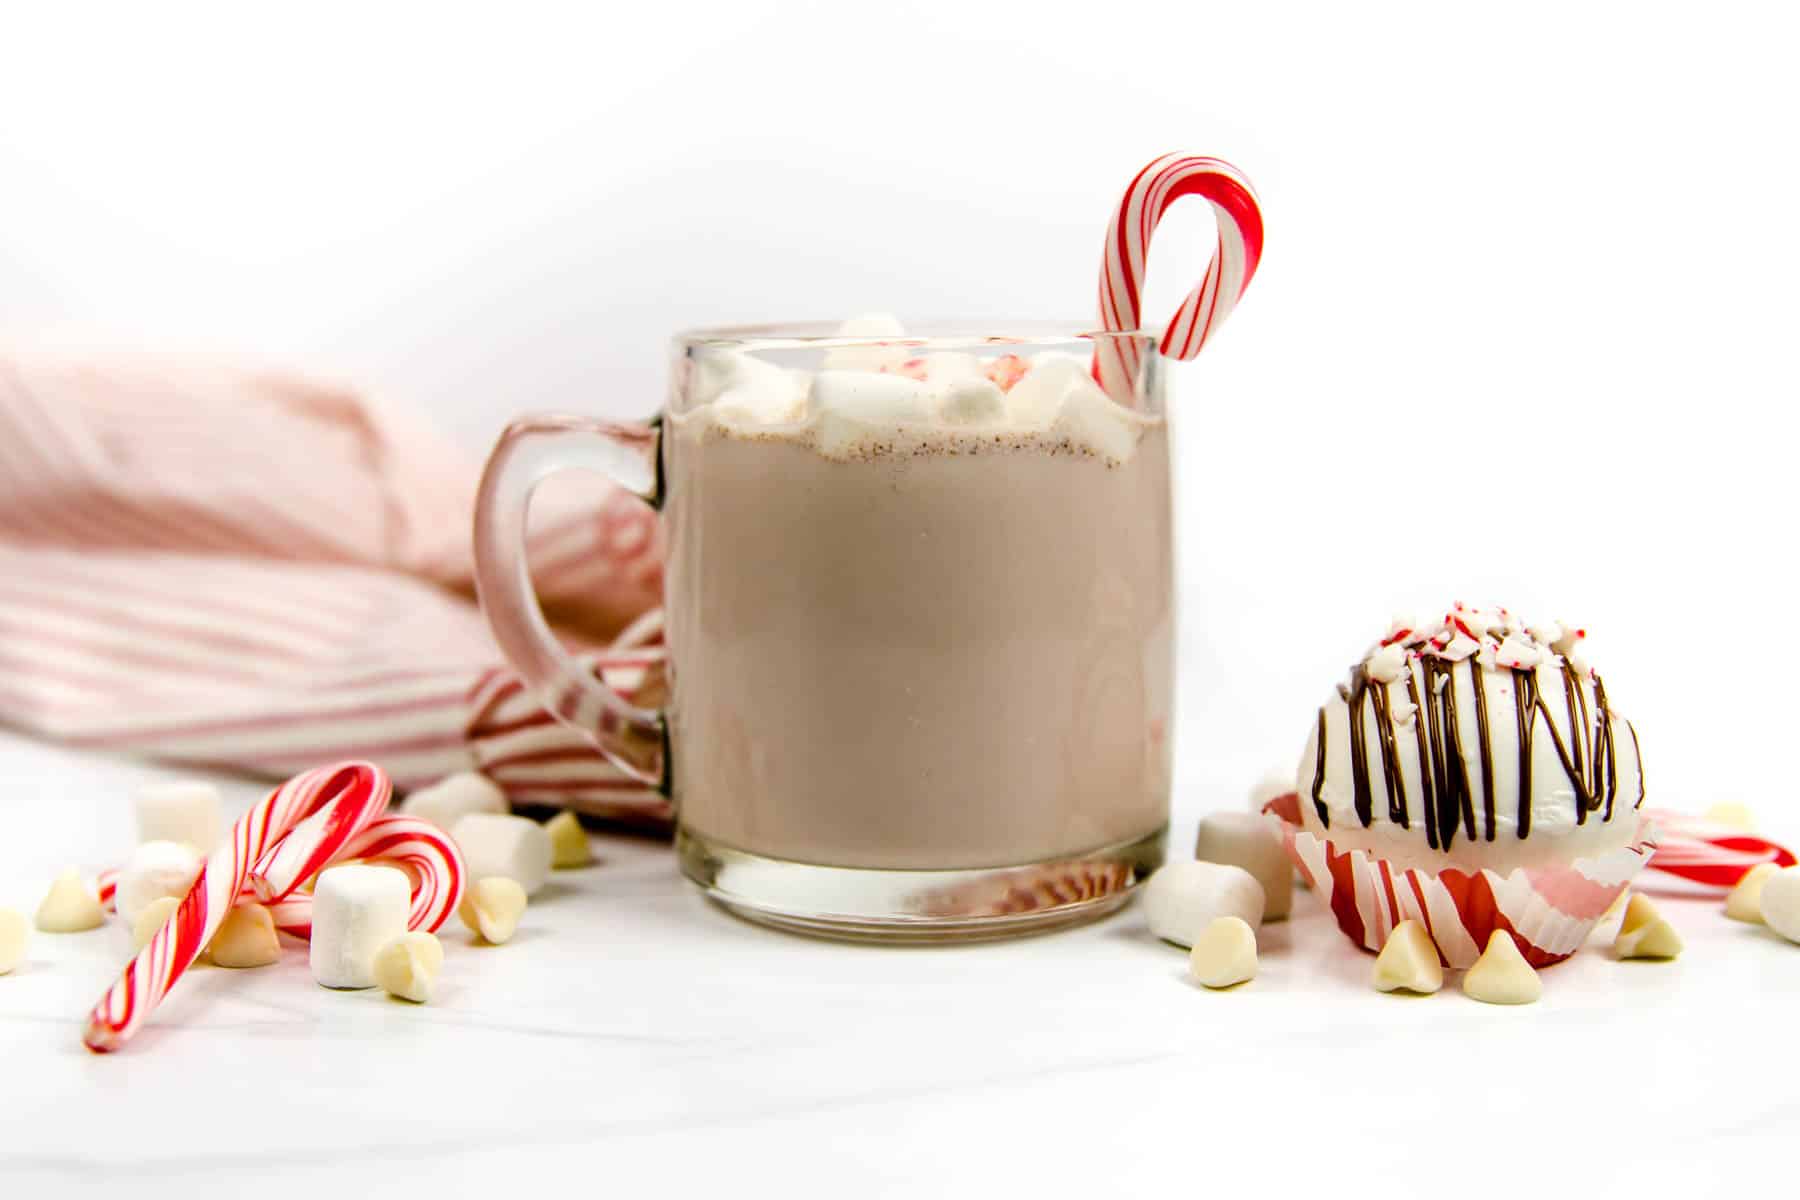 Ingredients for a peppermint hot cocoa bomb and a finished bomb sit around a mug of cocoa garnished with marshmallows and a candy cane.